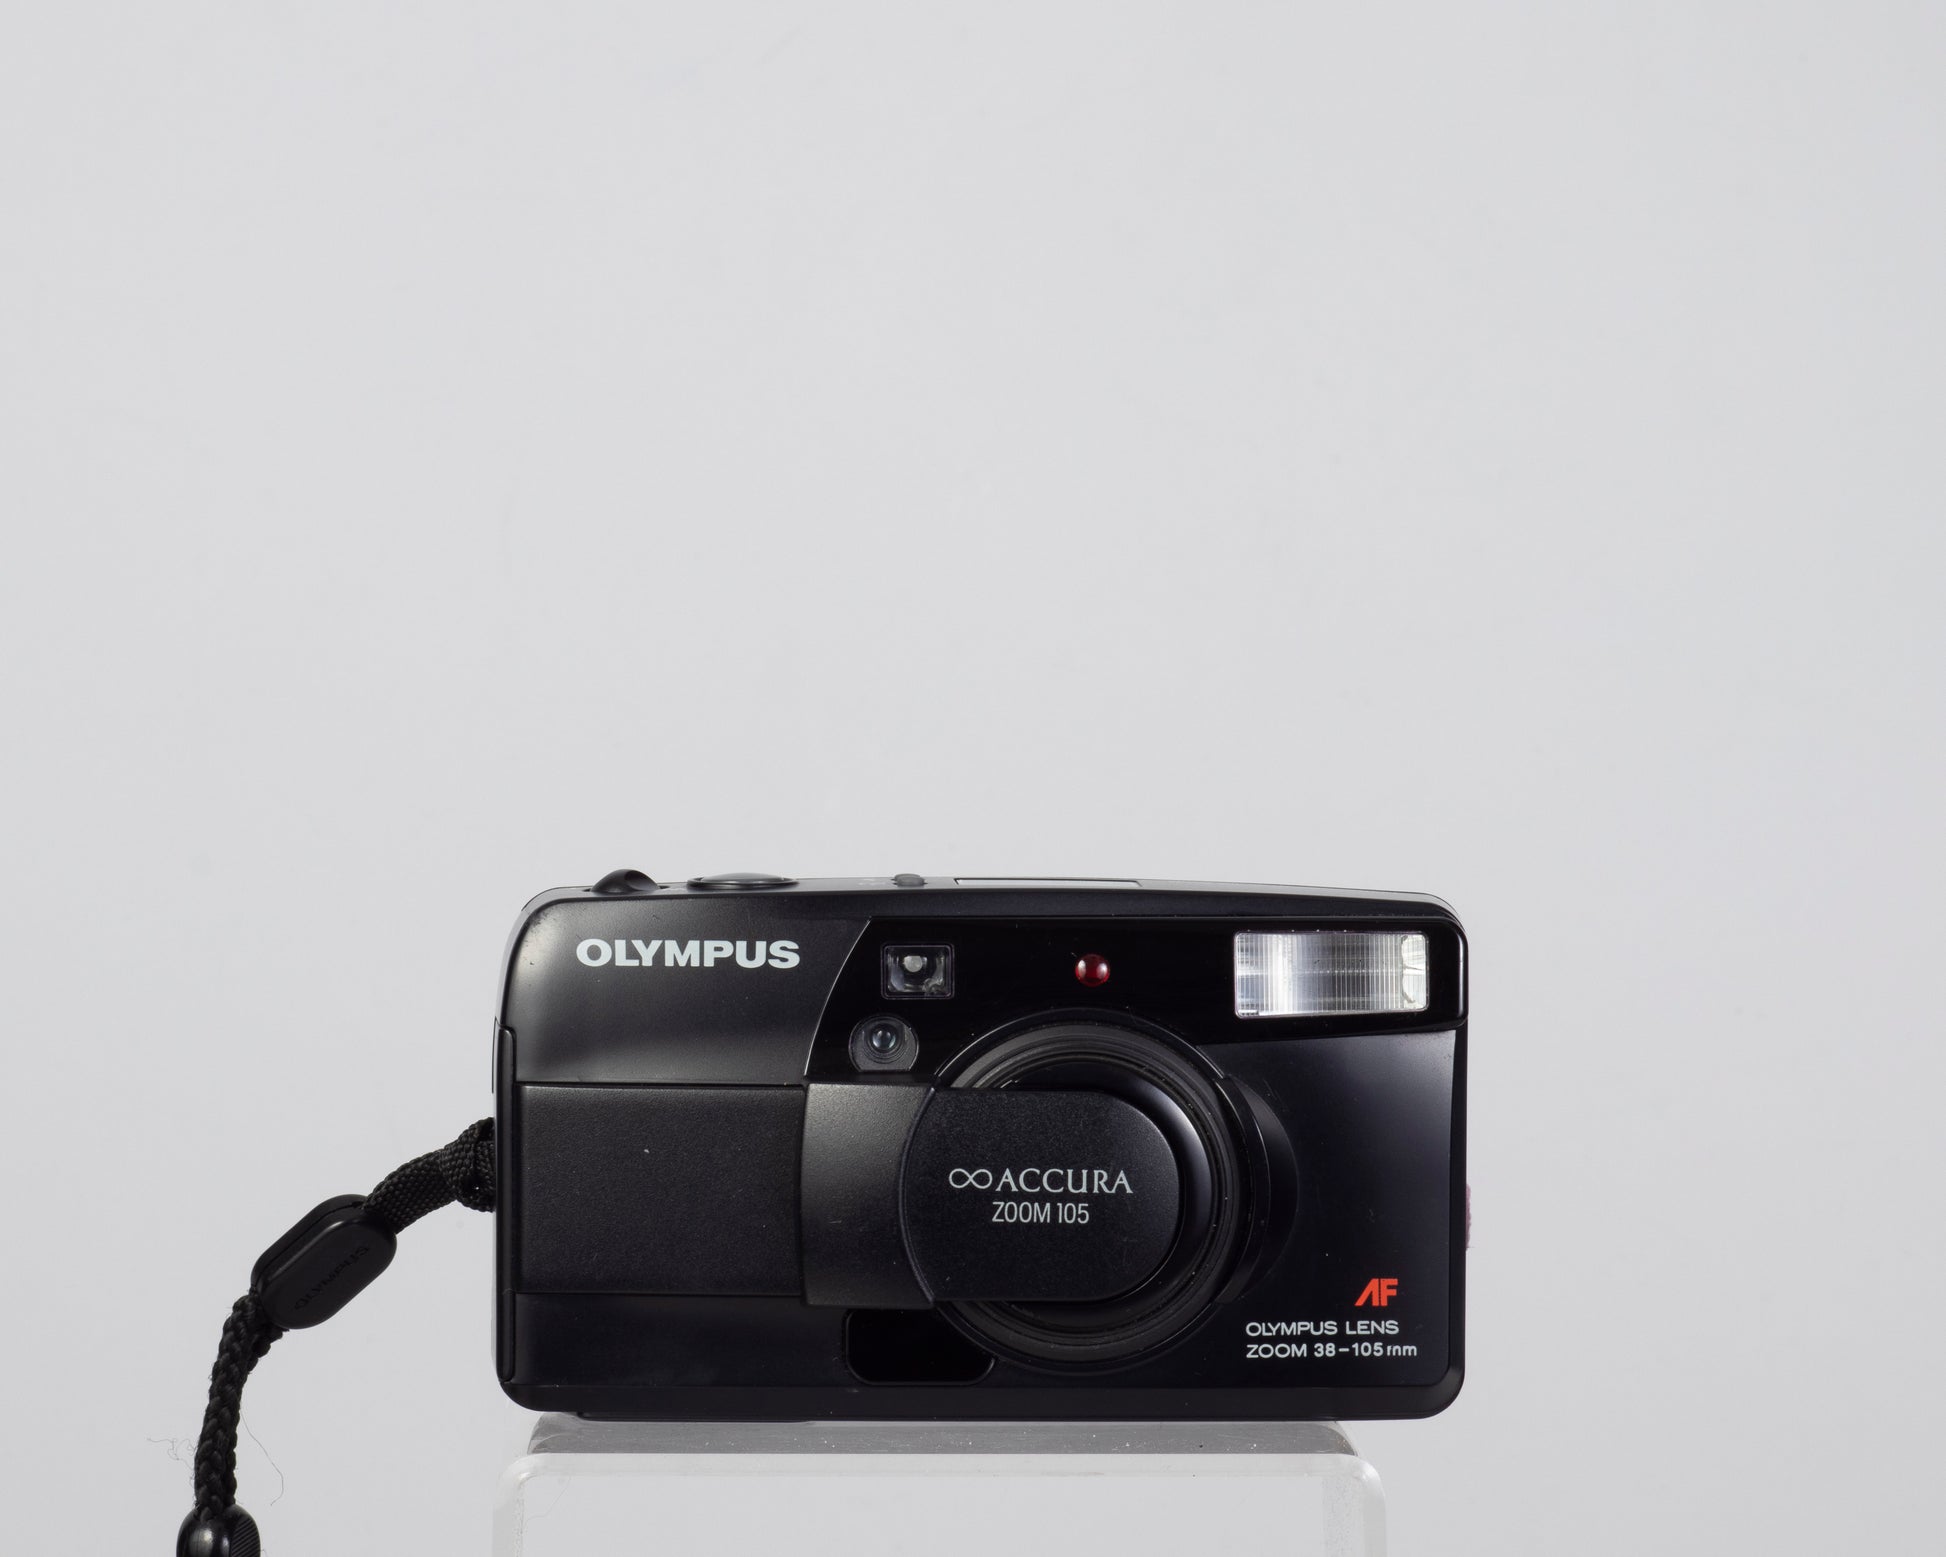 The Olympus Infinity Accura Zoom 105 35mm film camera with 38-105mm zoom lens